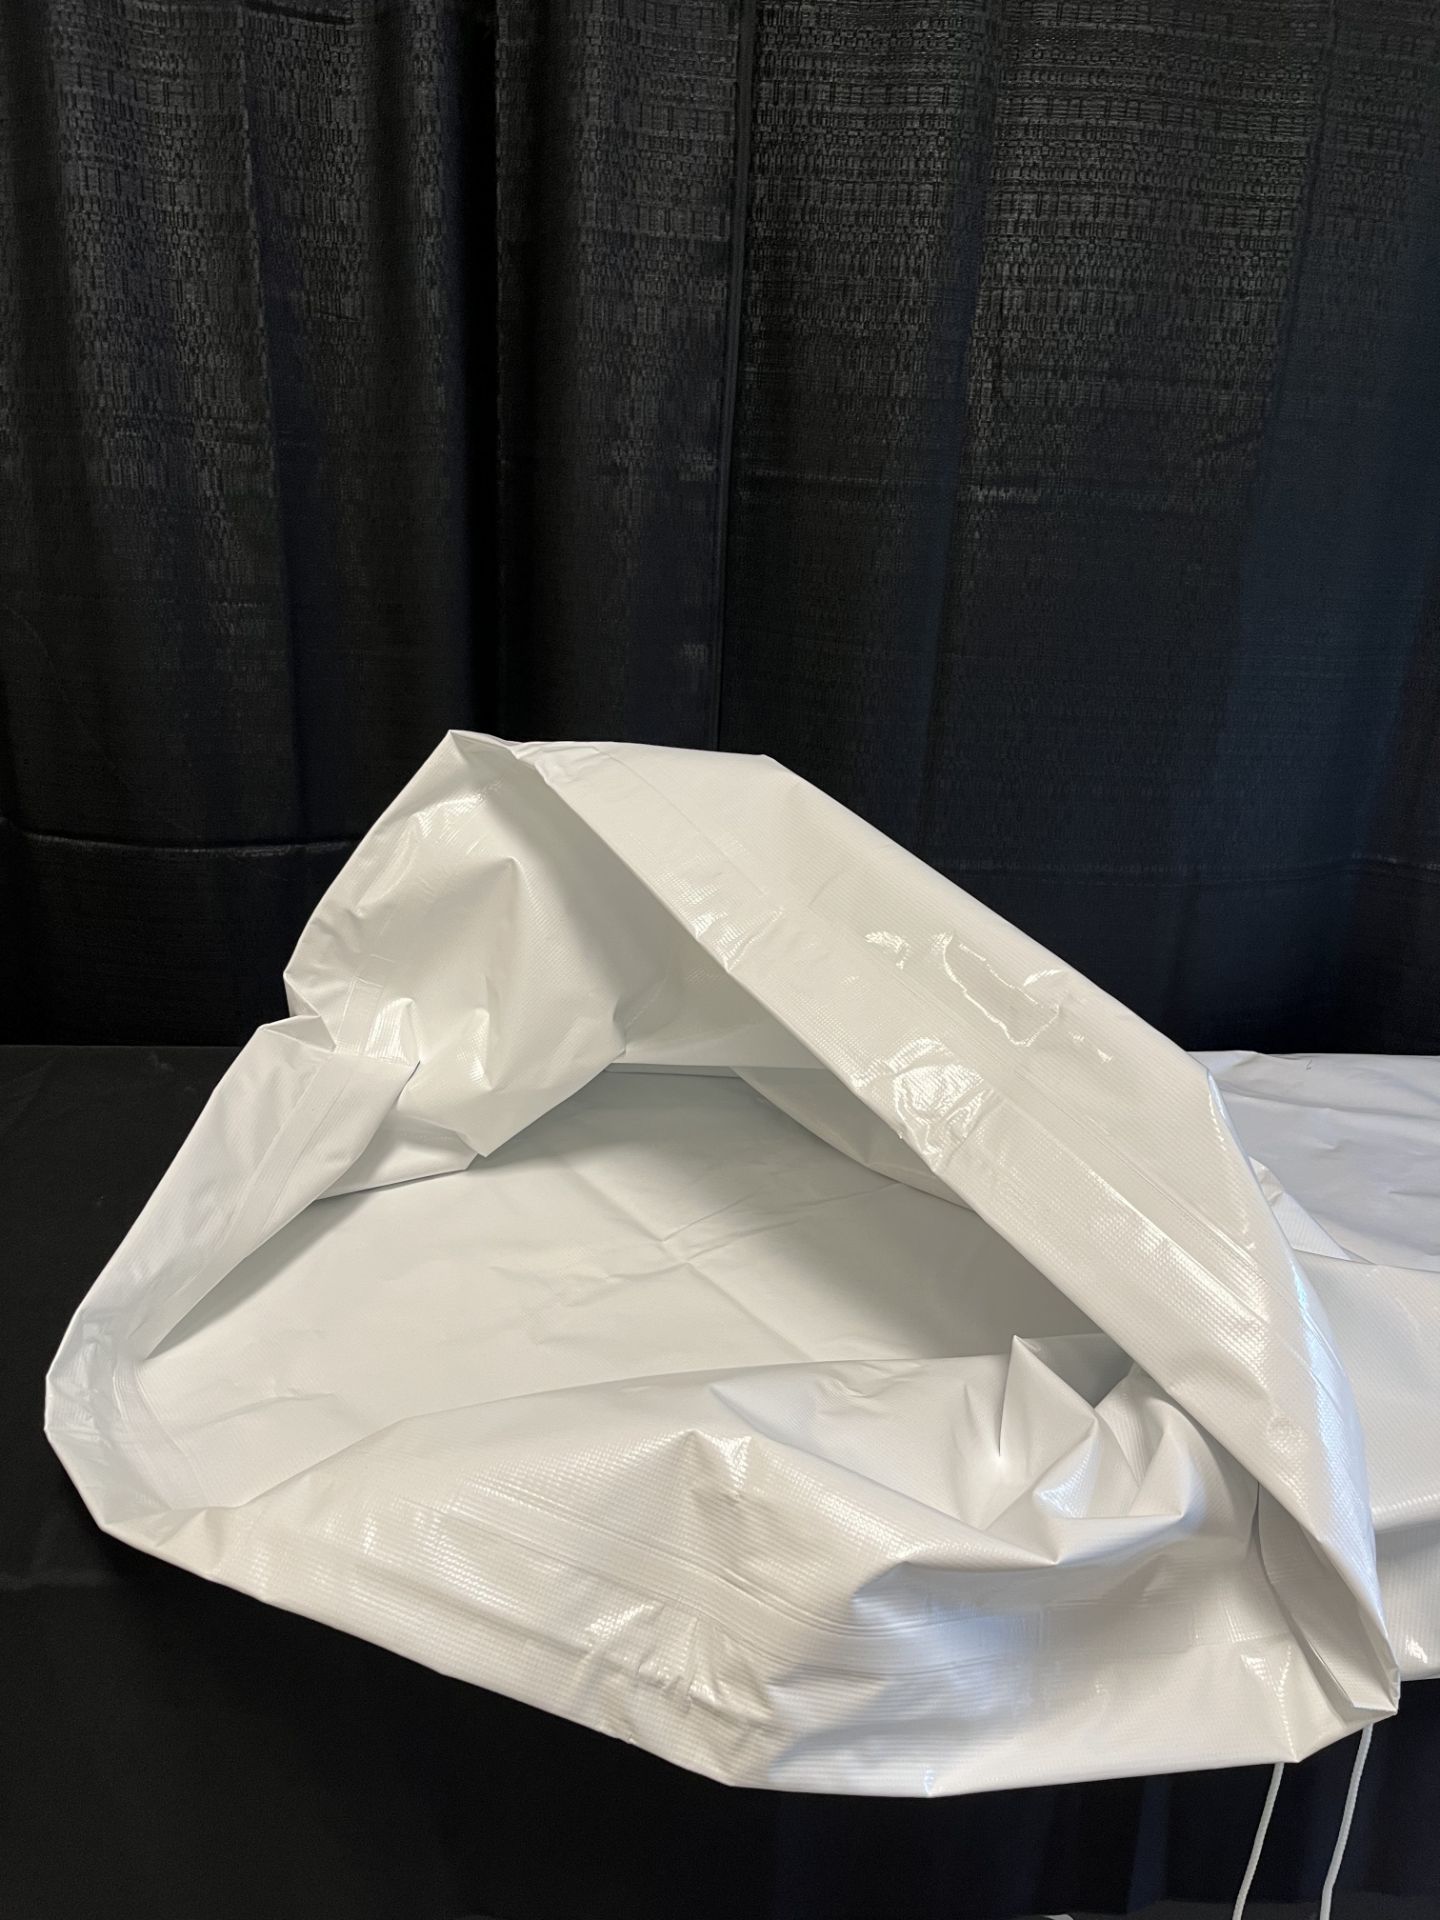 Tent Bag White Vinyl (brand new) 48in wide x 54in tall - Image 2 of 2